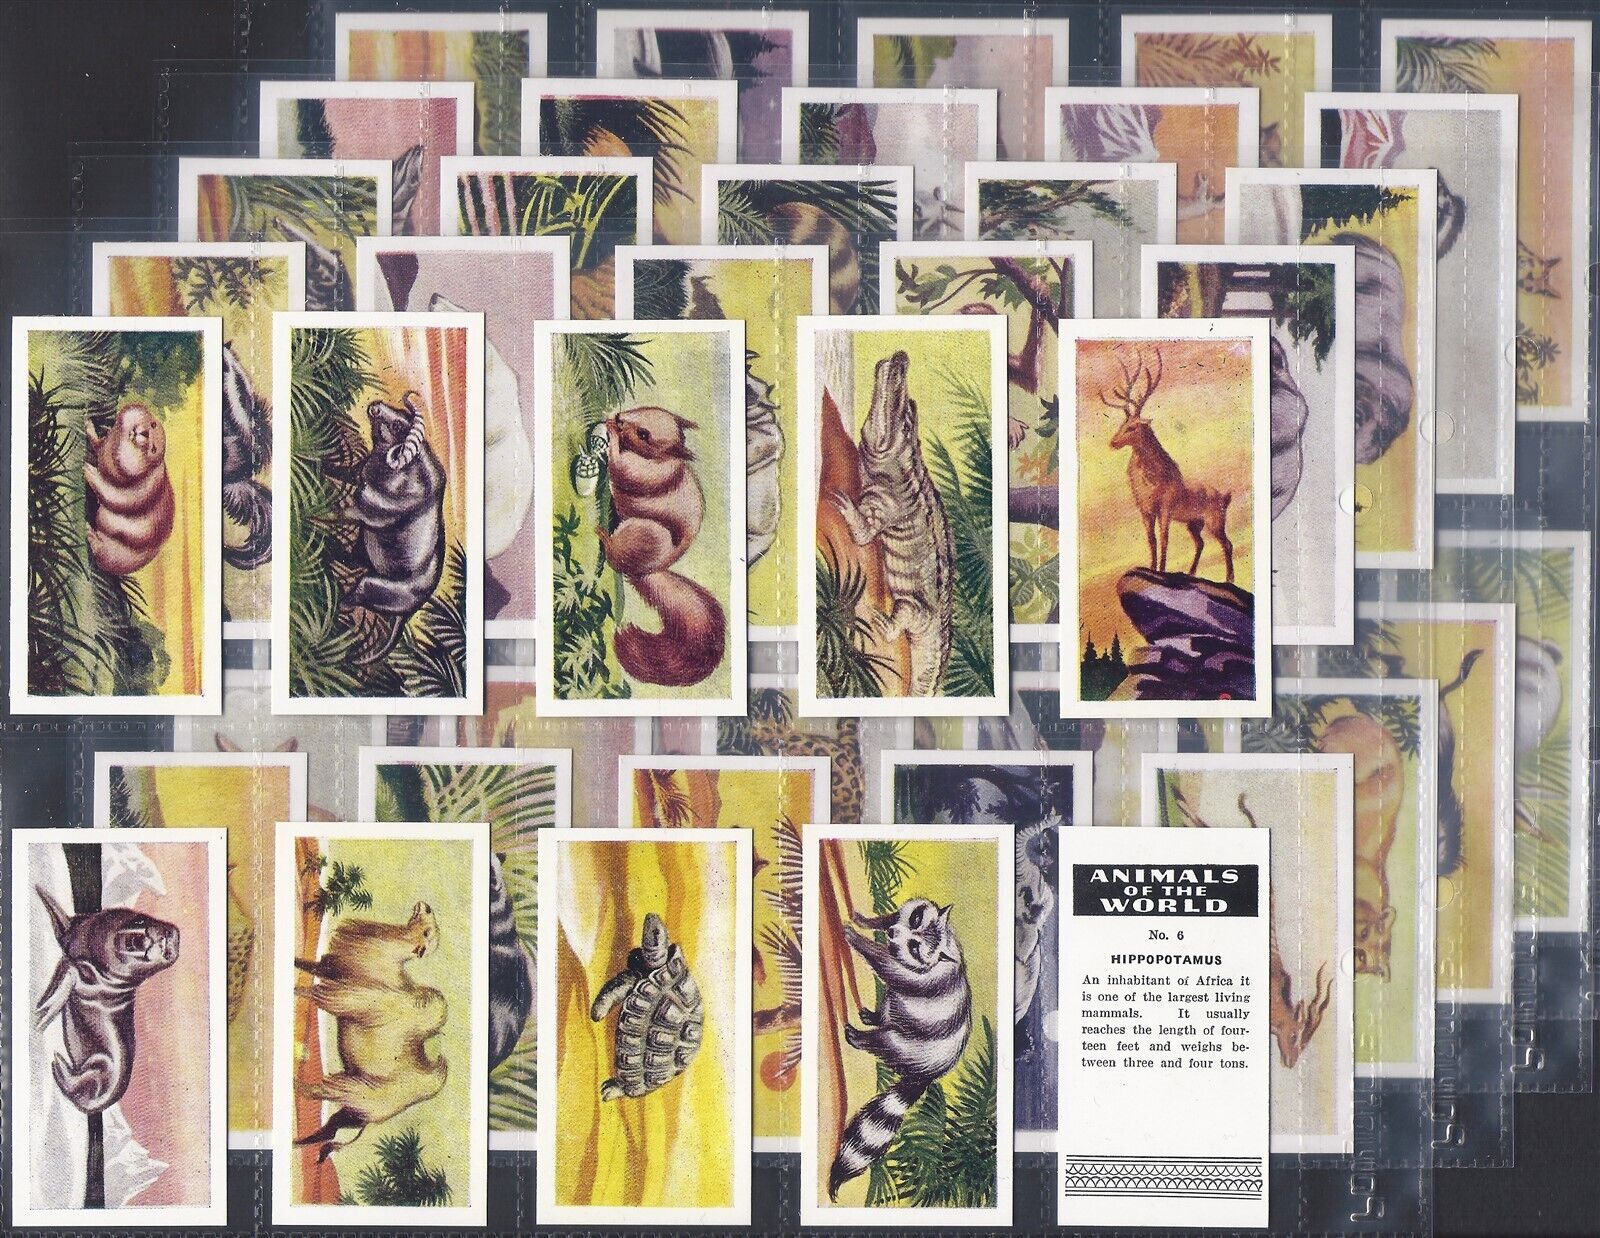 ANONYMOUS TRADE-FULL SET- ANIMALS OF THE WORLD 1954 (50 CARDS) EXCELLENT+++